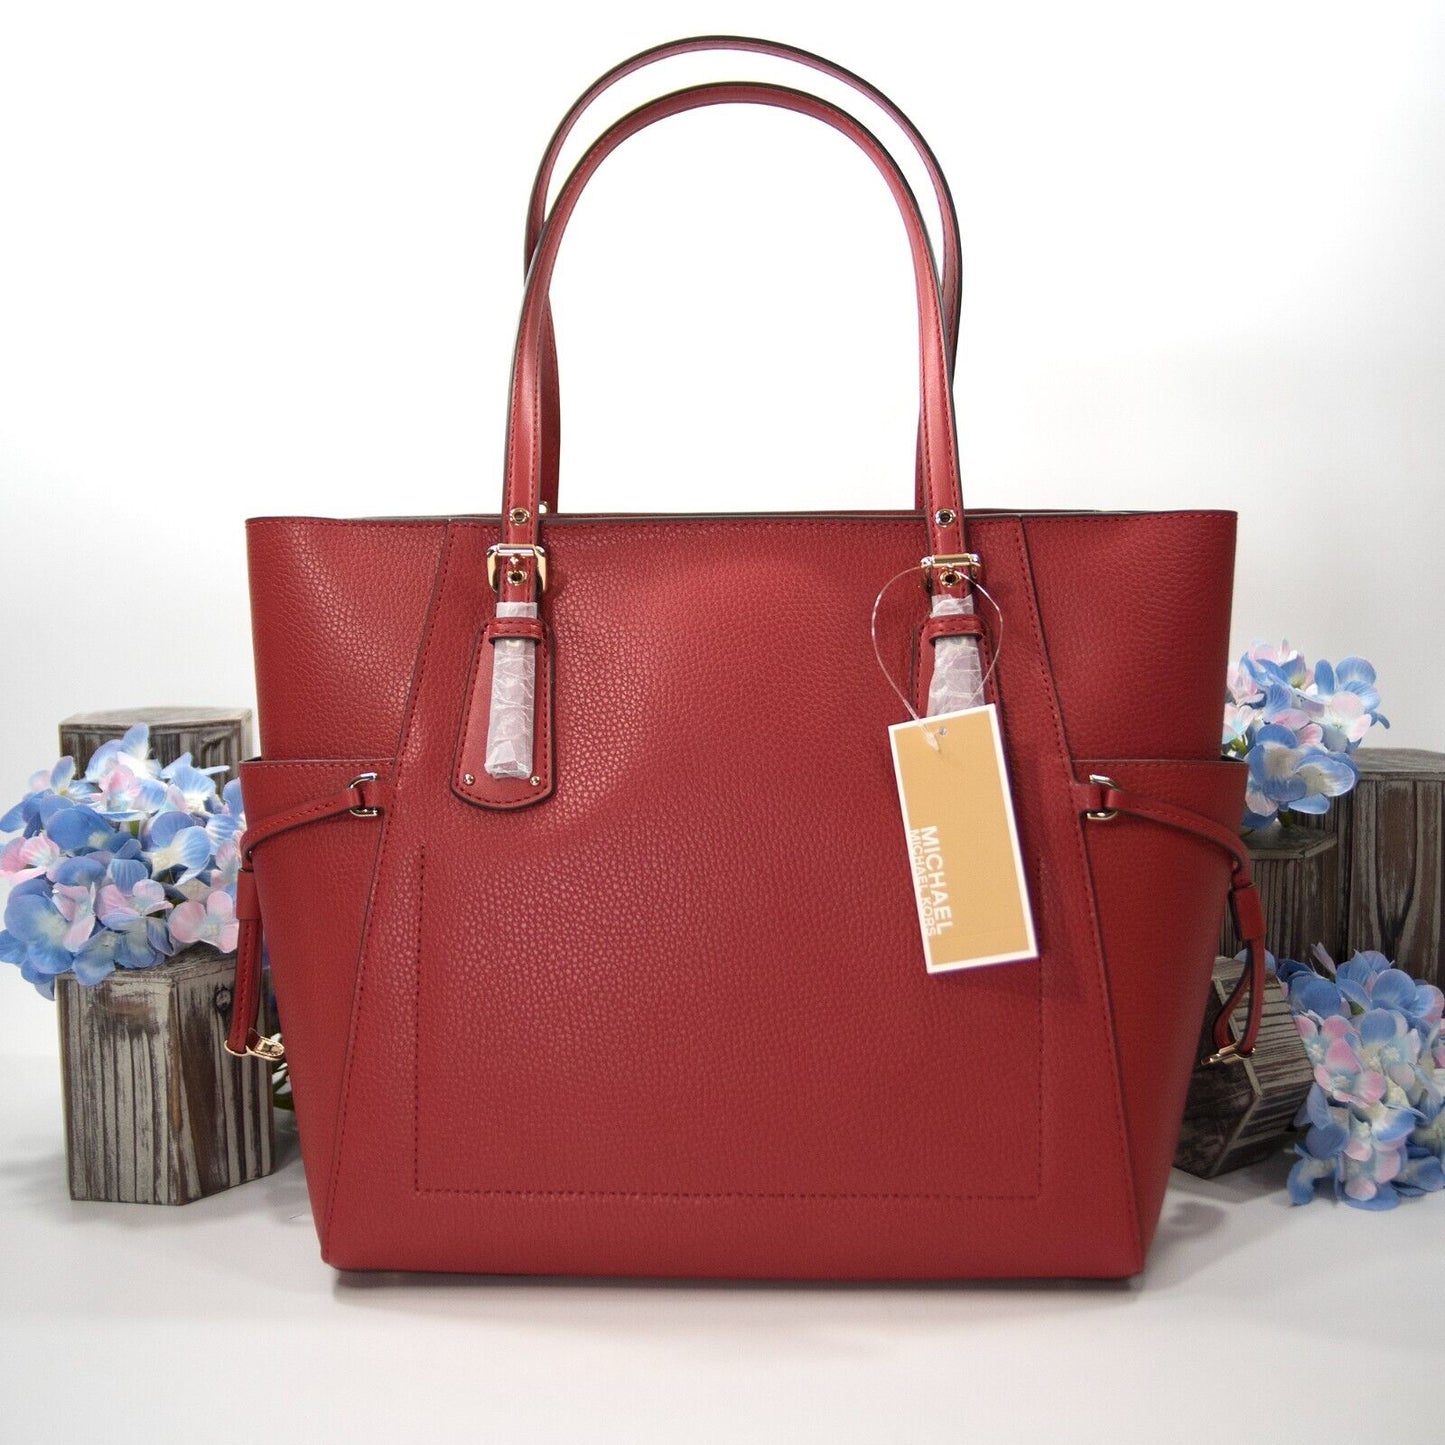 Michael Kors Flame Red Leather Voyager Medium Tote Bag NWT